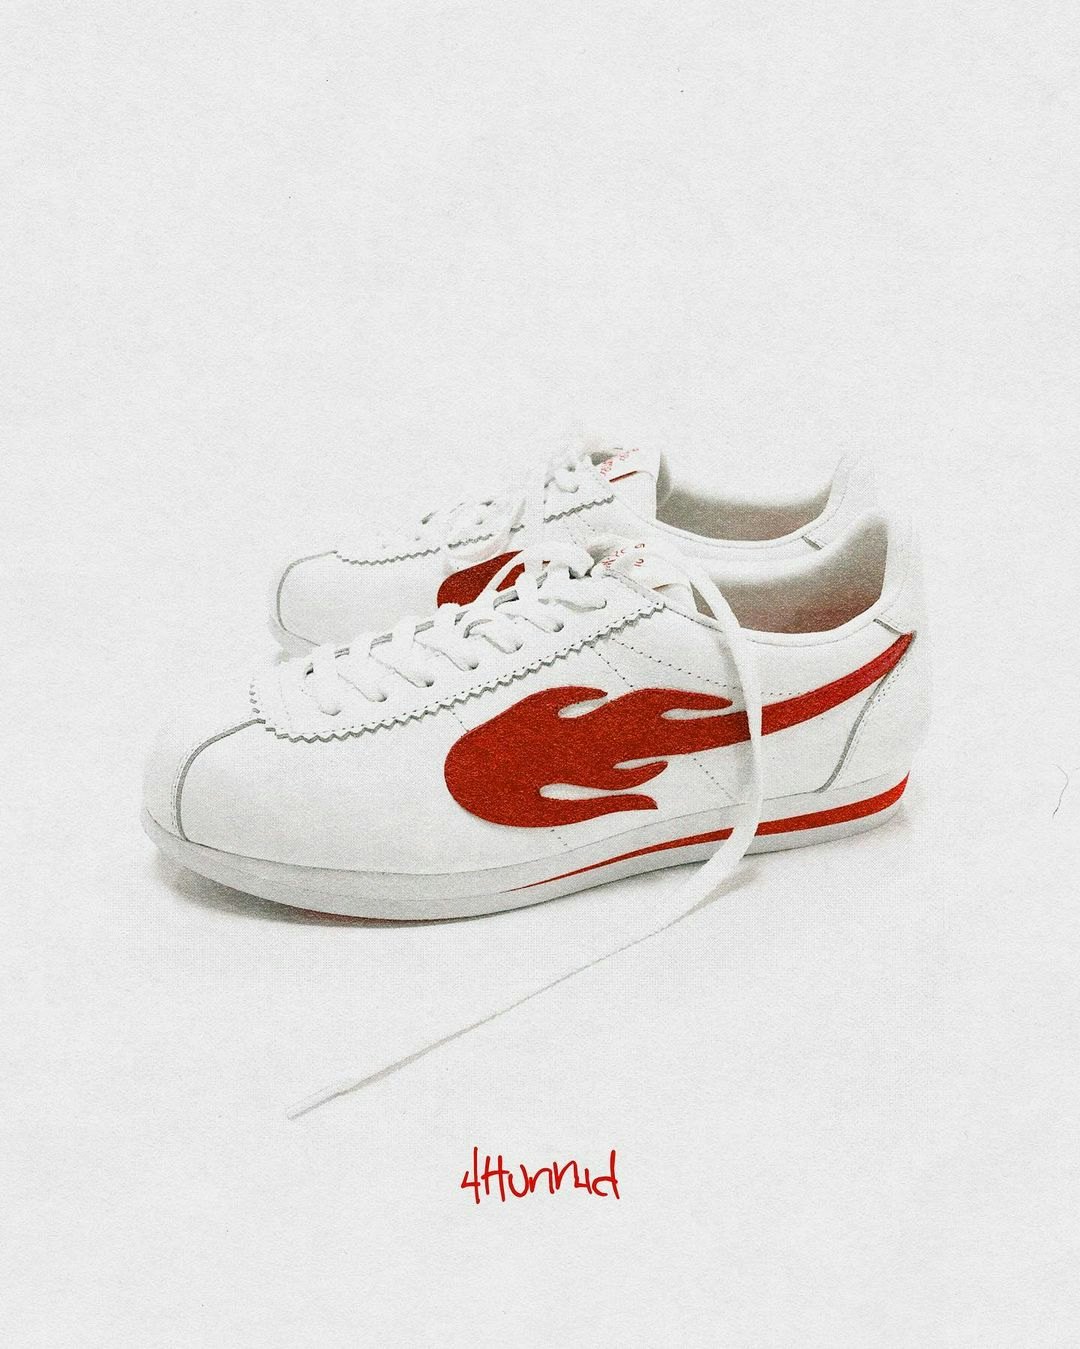 YG plans to launch his own Nike Cortez 